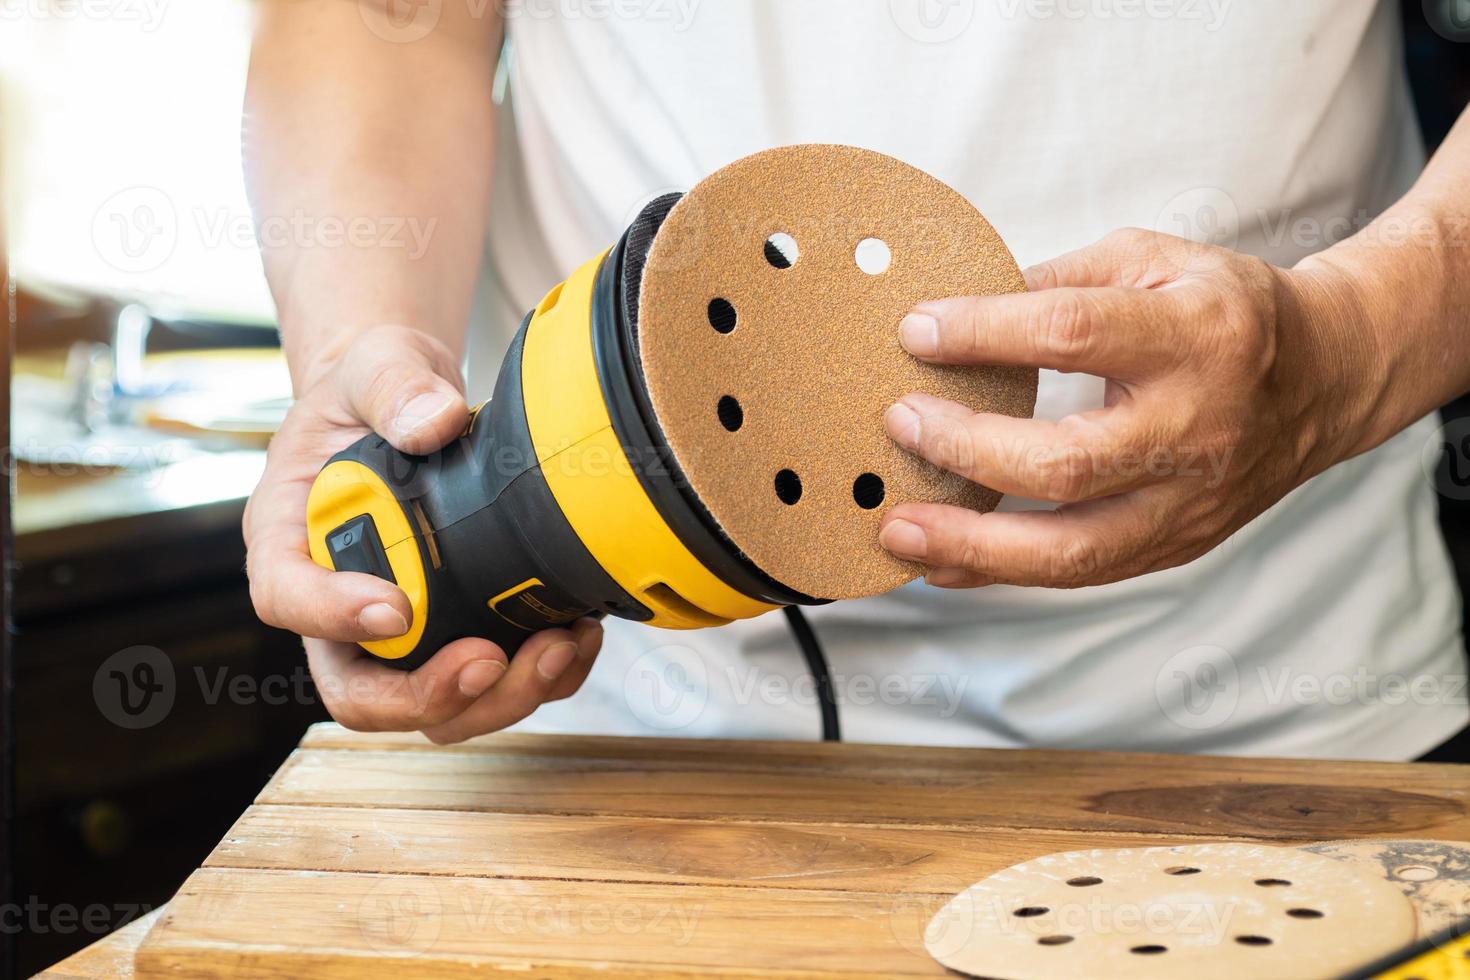 Carpenter attach sandpaper to an orbital sander or palm sander after remove the paper backing of the sandpaper.DIY maker and woodworking concept. selective focus photo